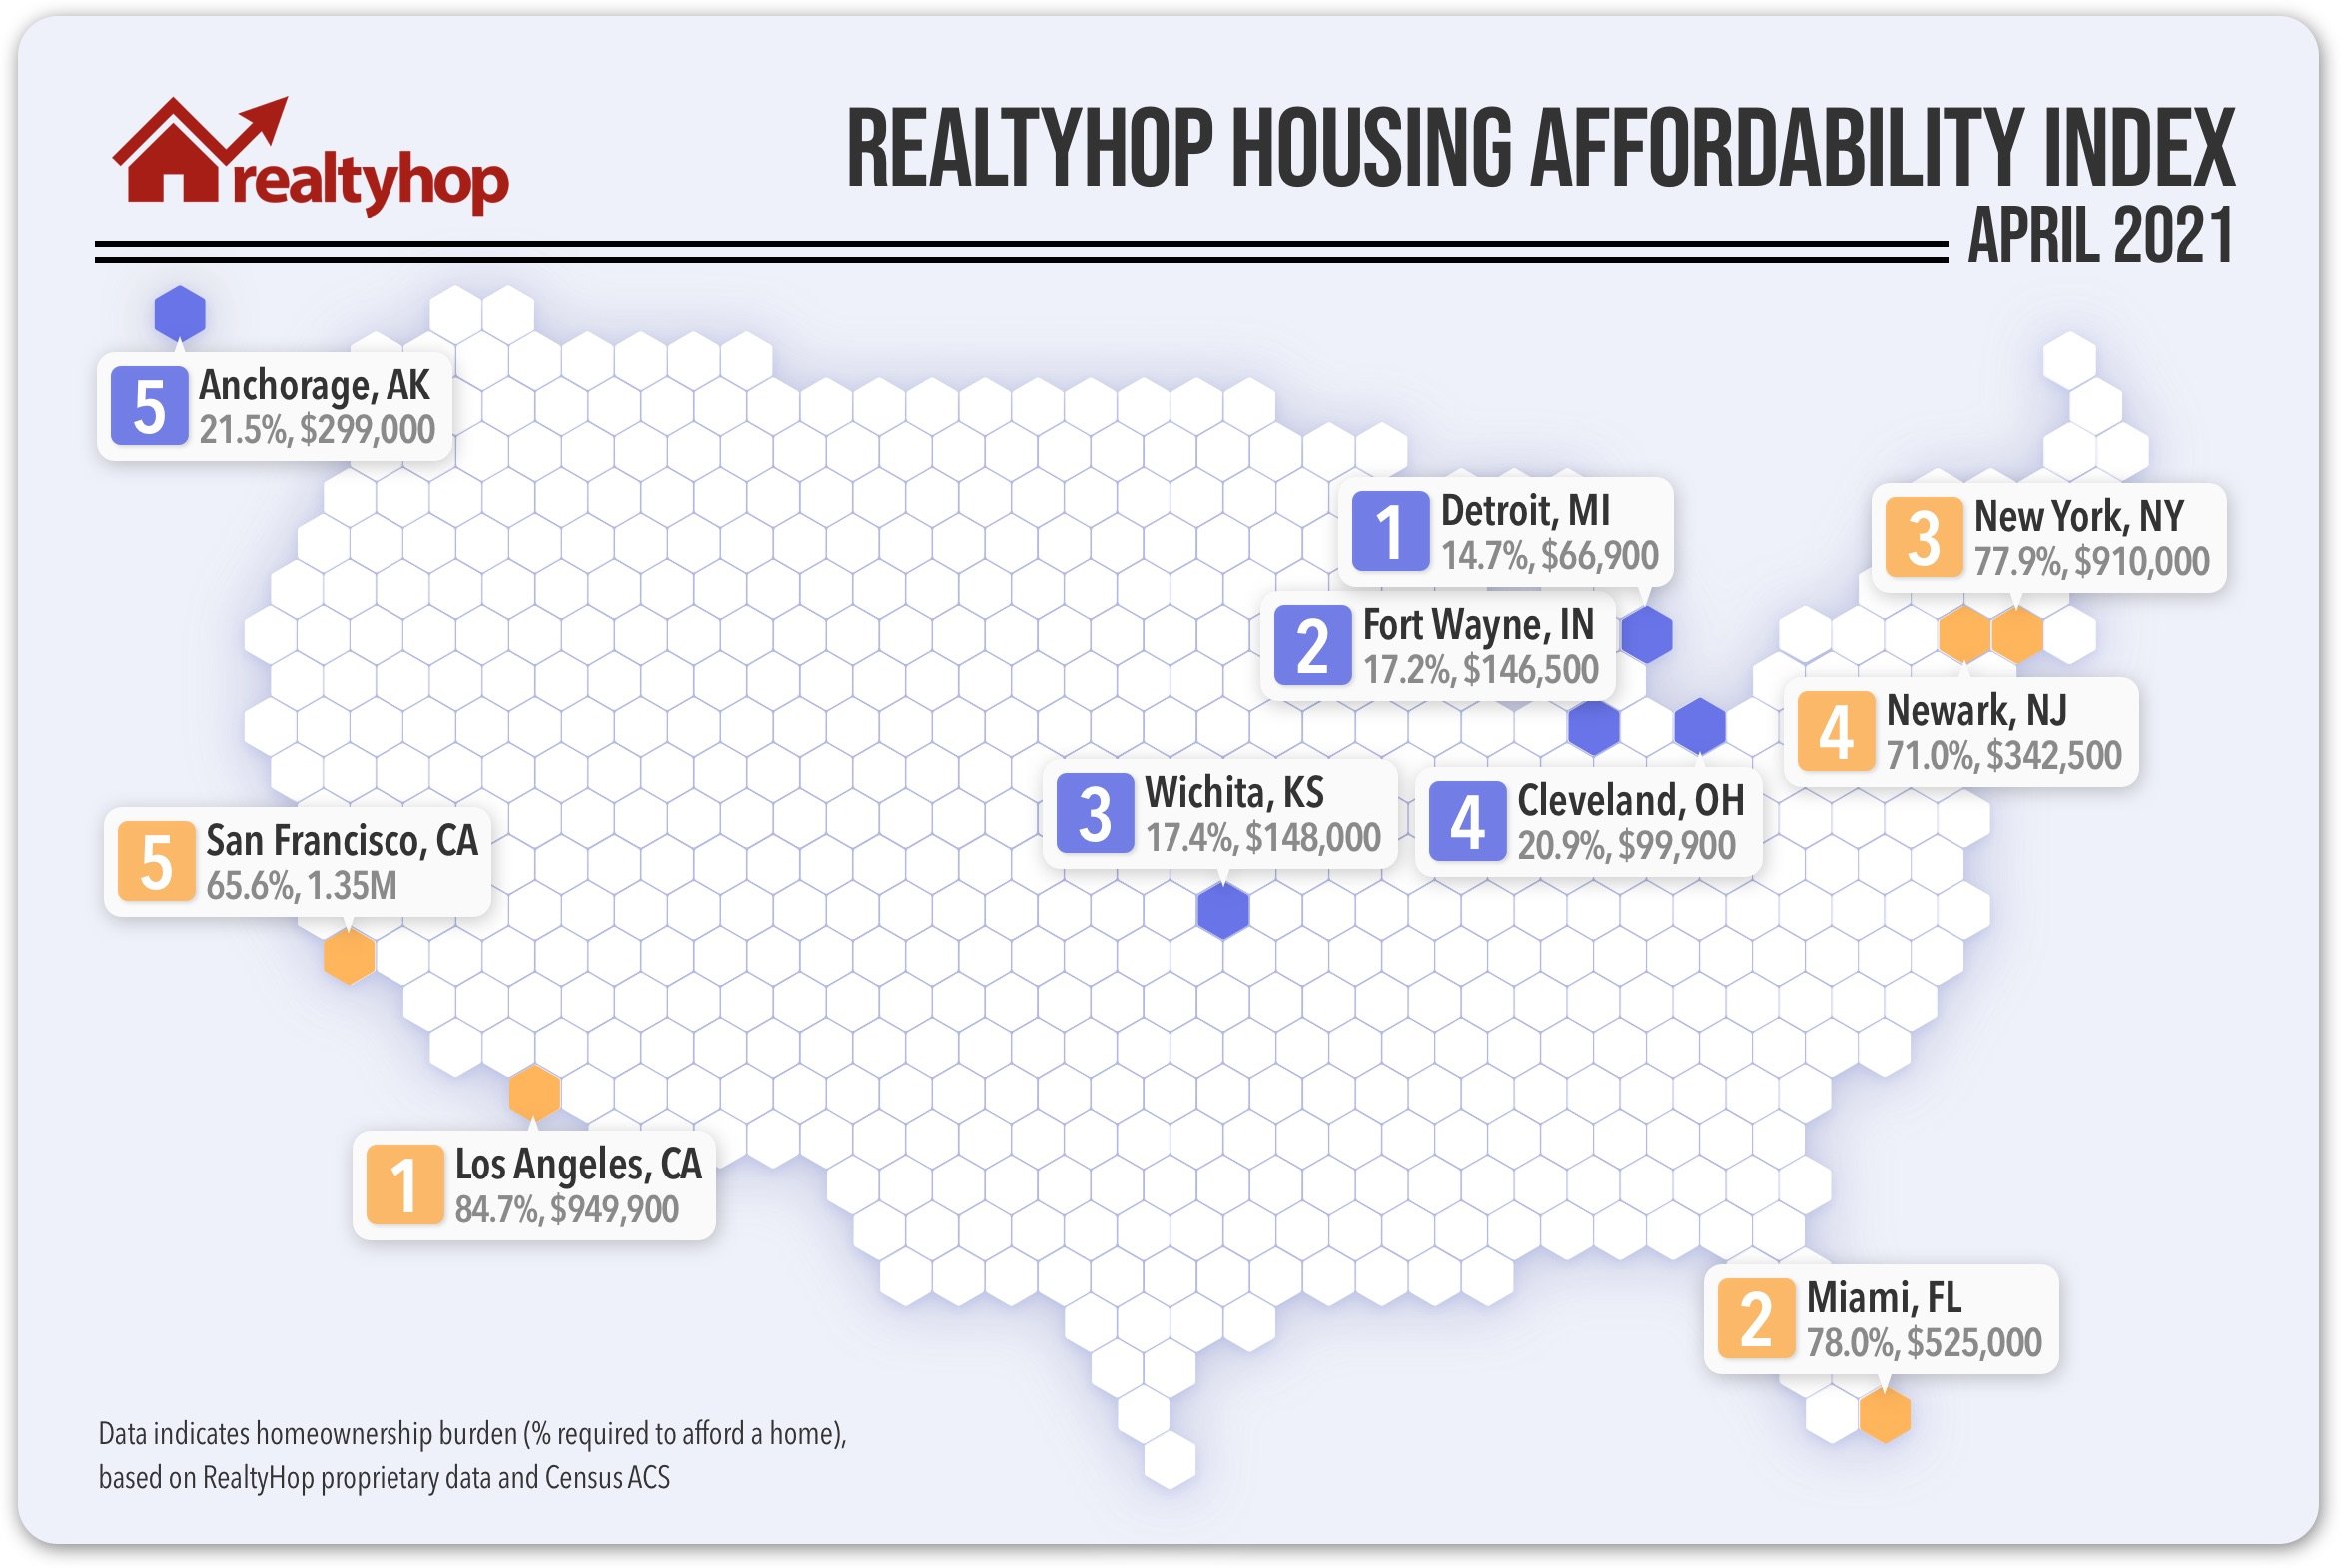 This chart highlights the 5 least and most affordable housing markets in the U.S.